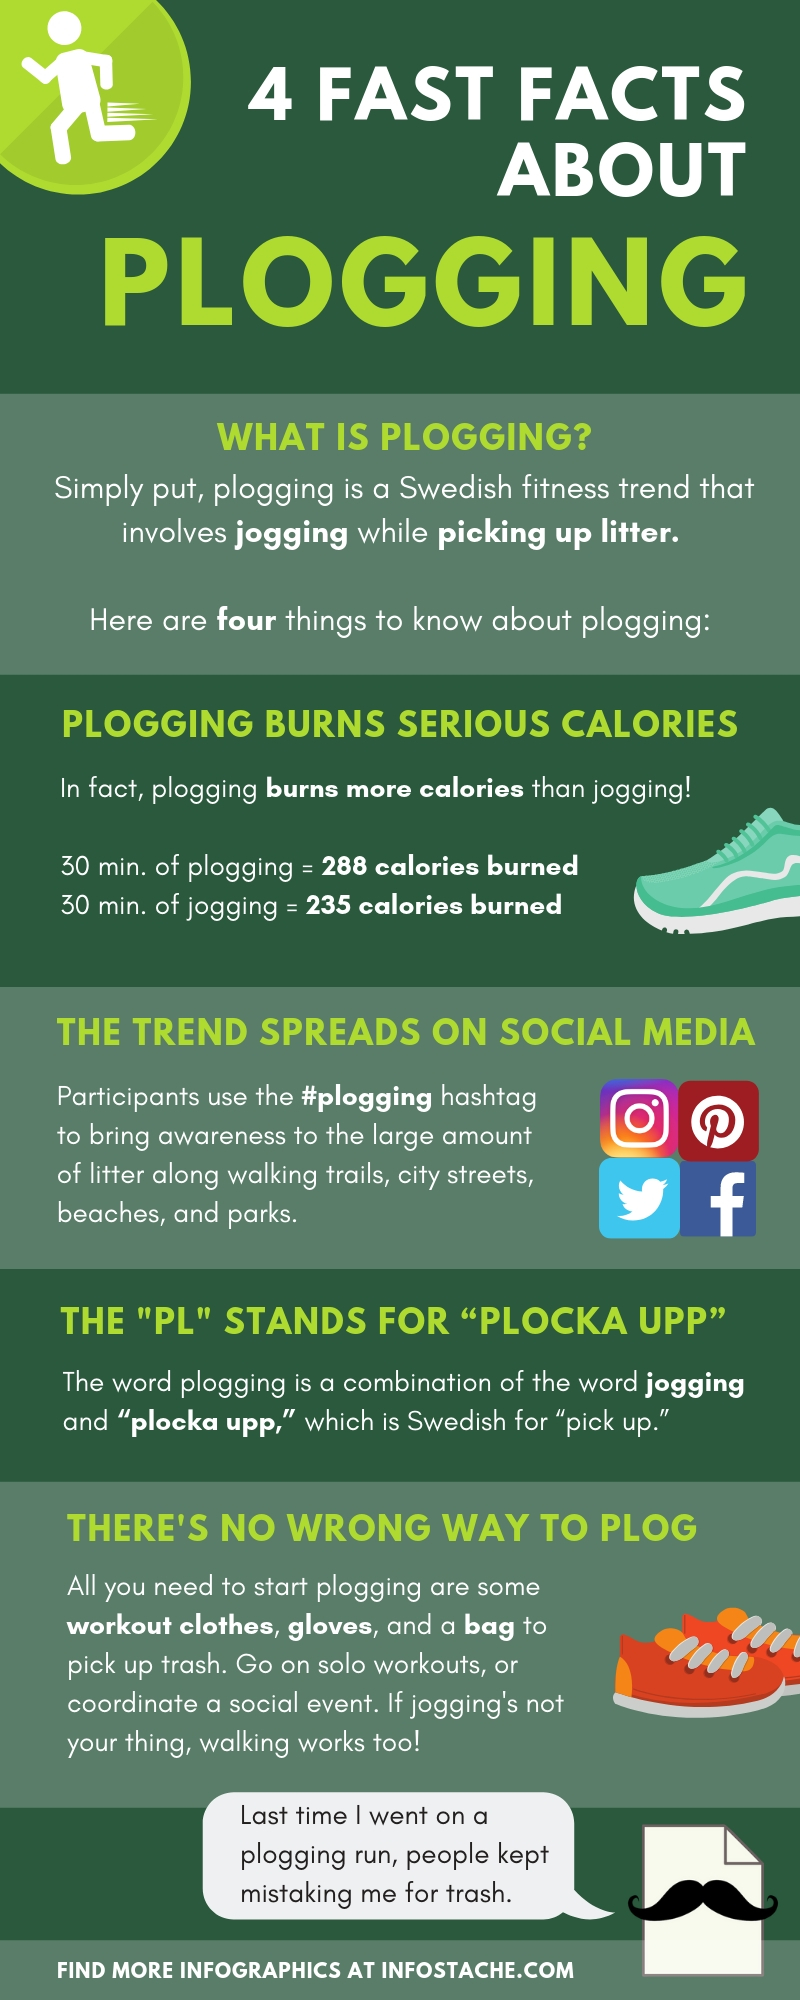 4 Fast Facts About Plogging - Infographic